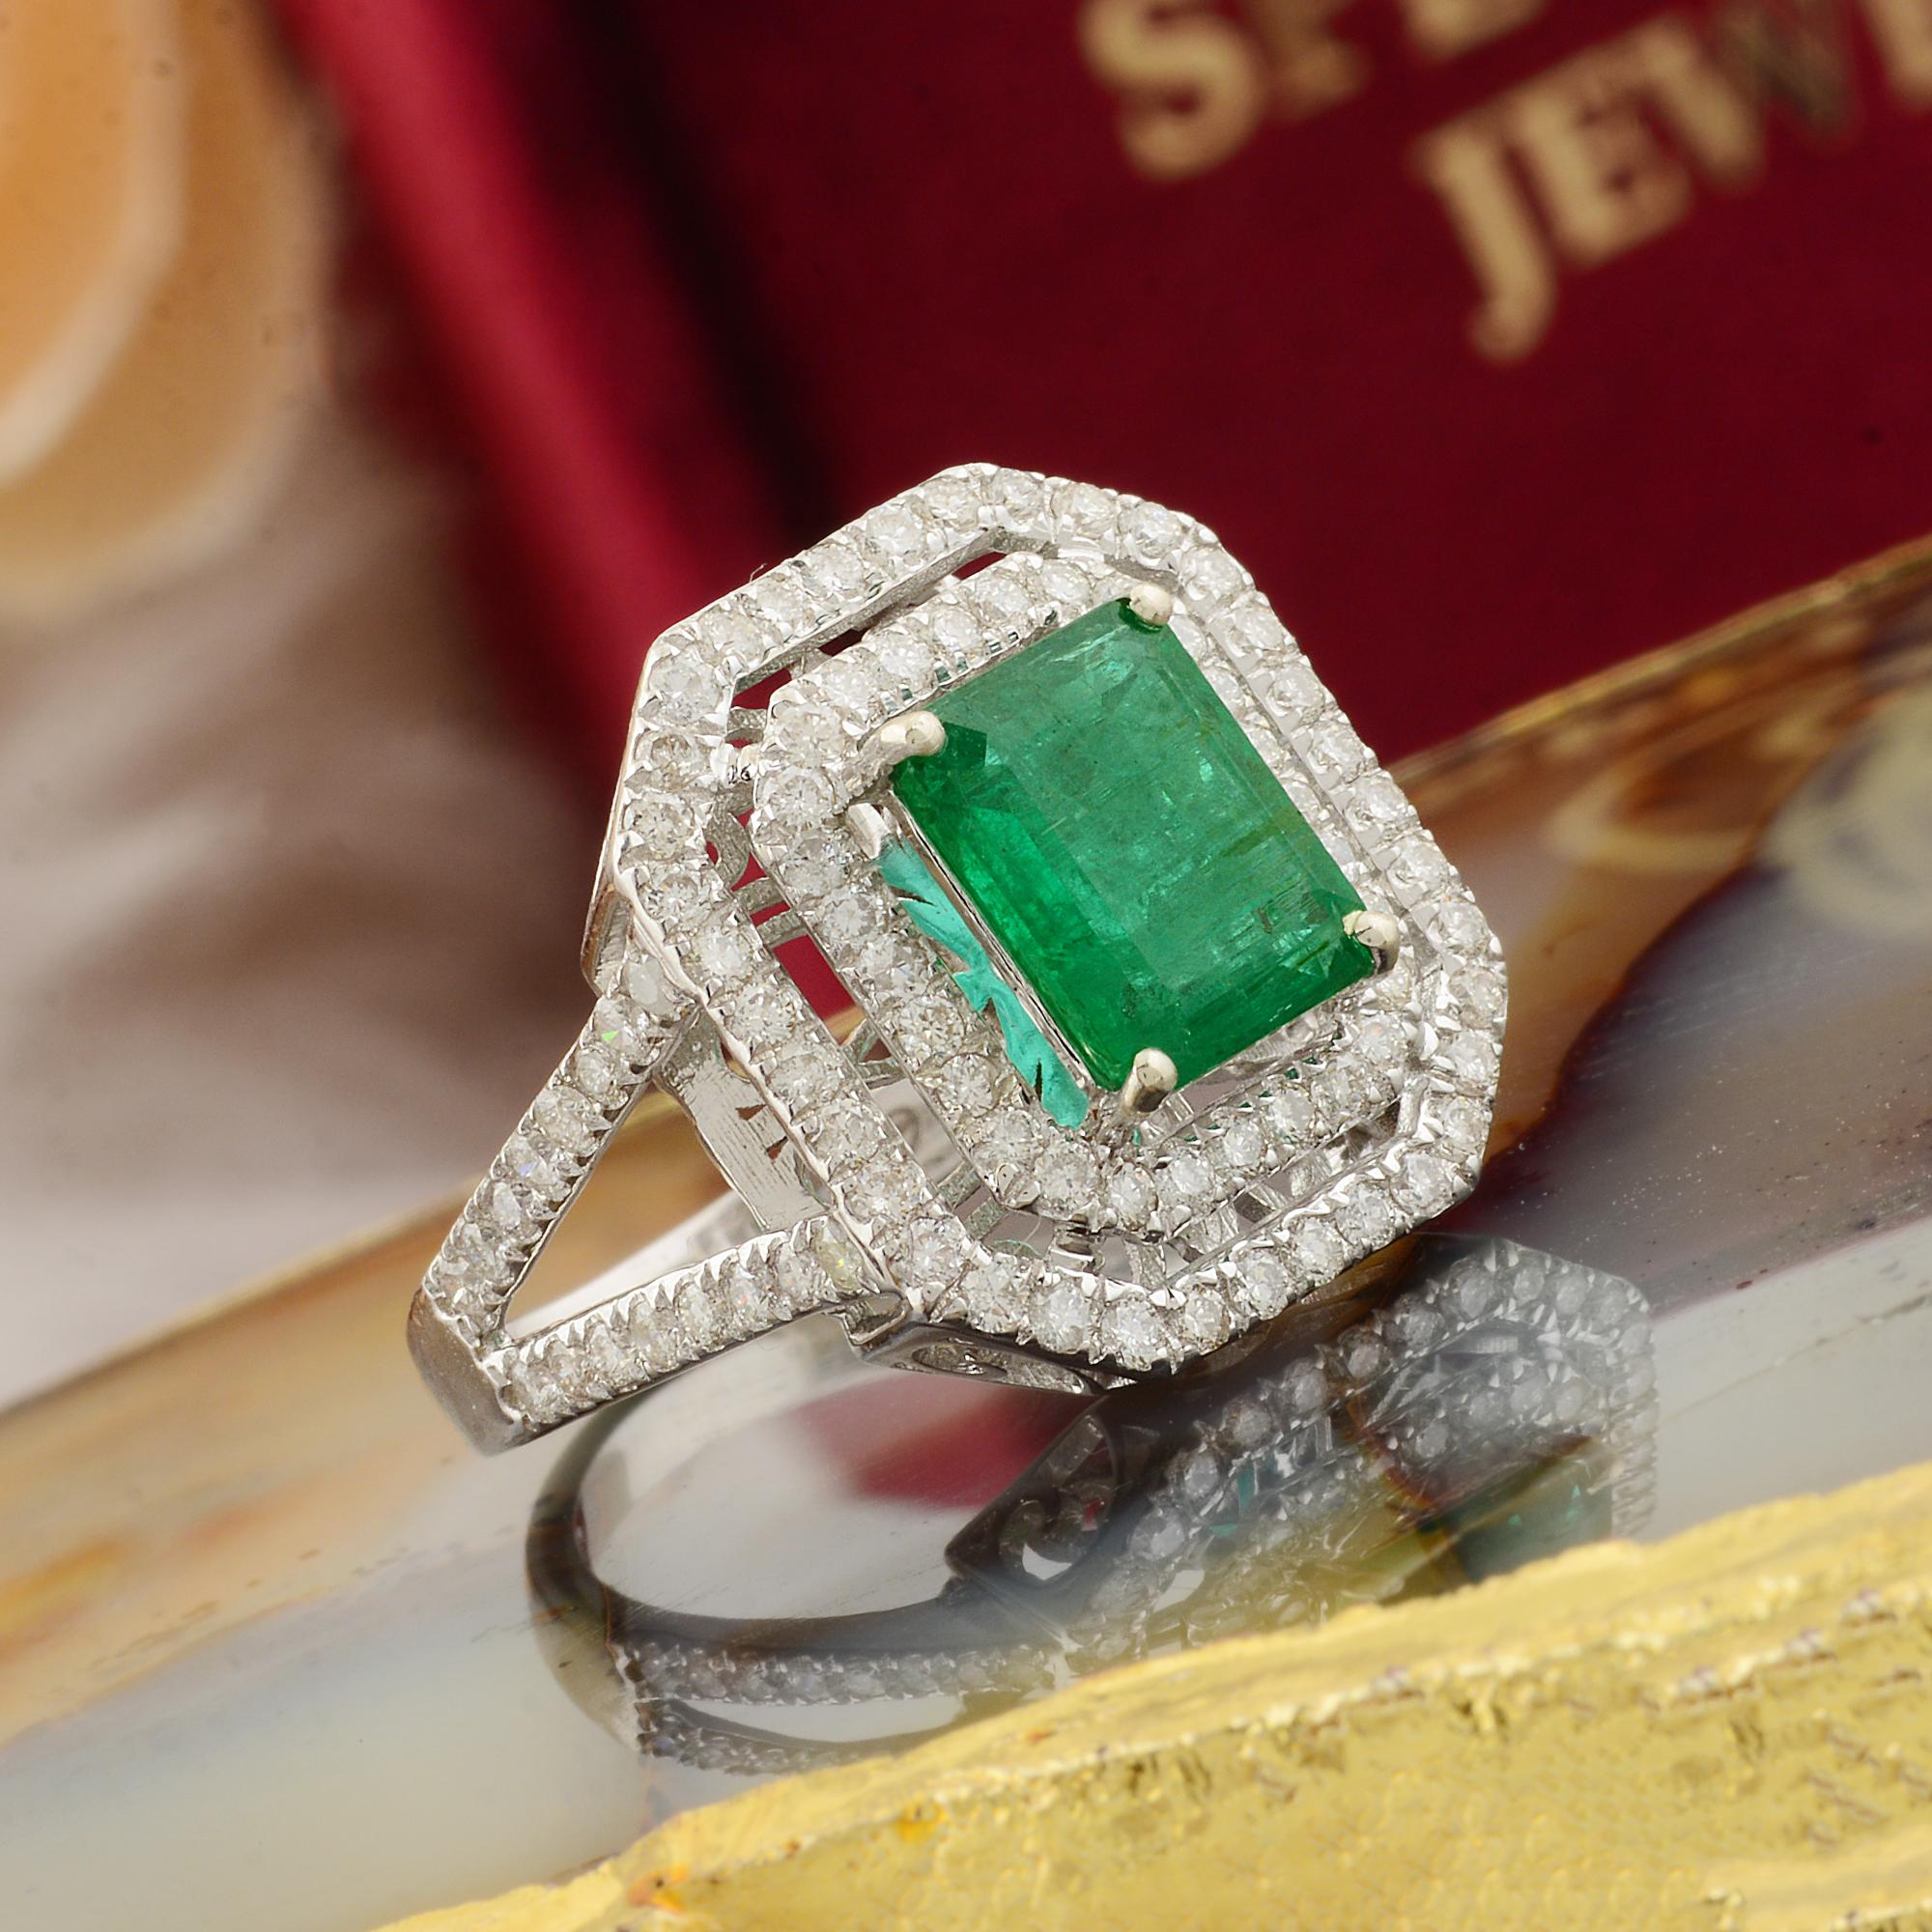 For Sale:  Natural Emerald Cocktail Ring Diamond Pave 10k White Gold Fine Handmade Jewelry 3